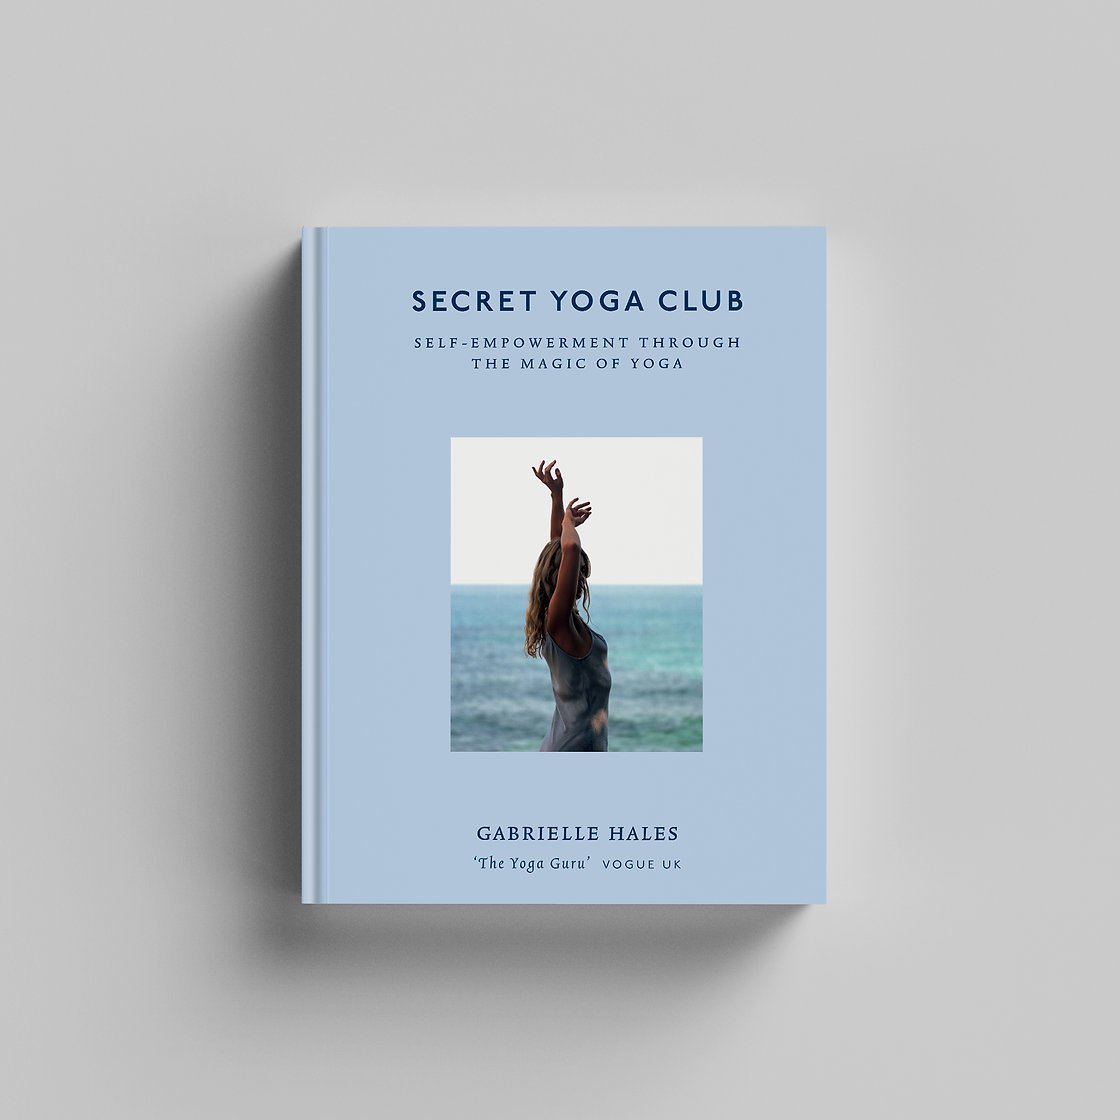 Book assignment for 'Secret Yoga Club' by Gabrielle Hales